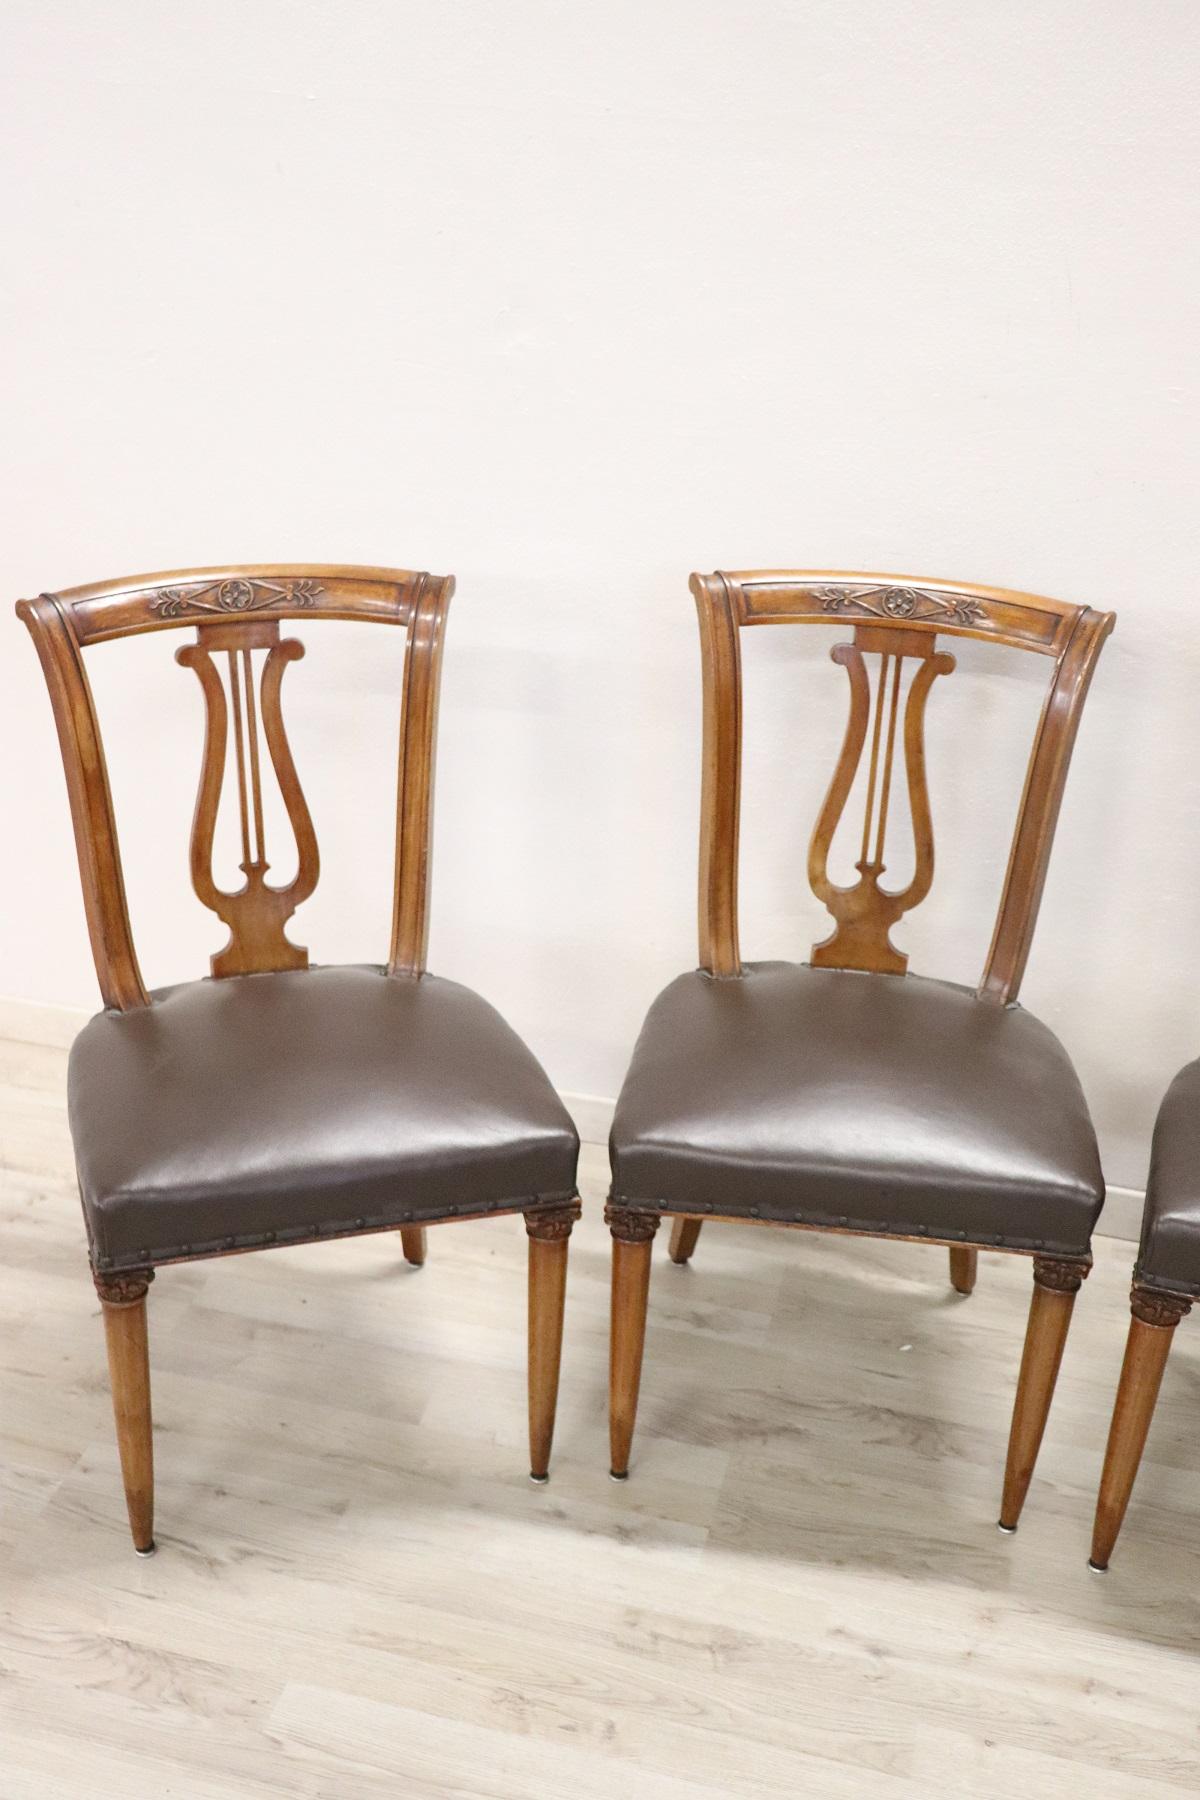 Impressive 20th century Italian neoclassical style walnut carved dining room set of six chairs
The chairs made in walnut with important capitals carved with acanthus leaves. The chairs with brown leather seatback with a lyre pattern are also